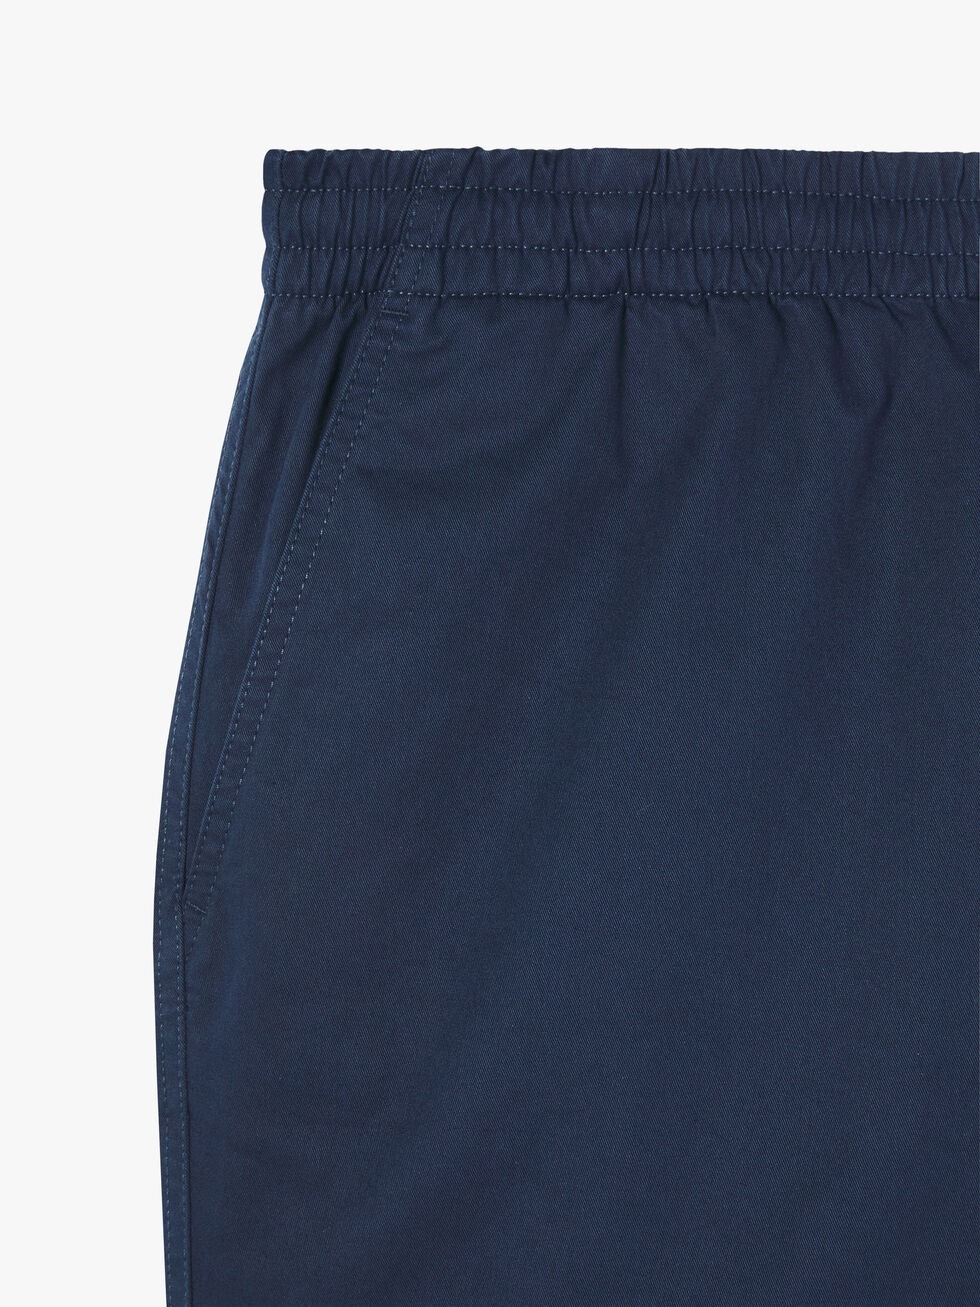 RM Williams Rugby Shorts - Ink | Port Phillip Shop